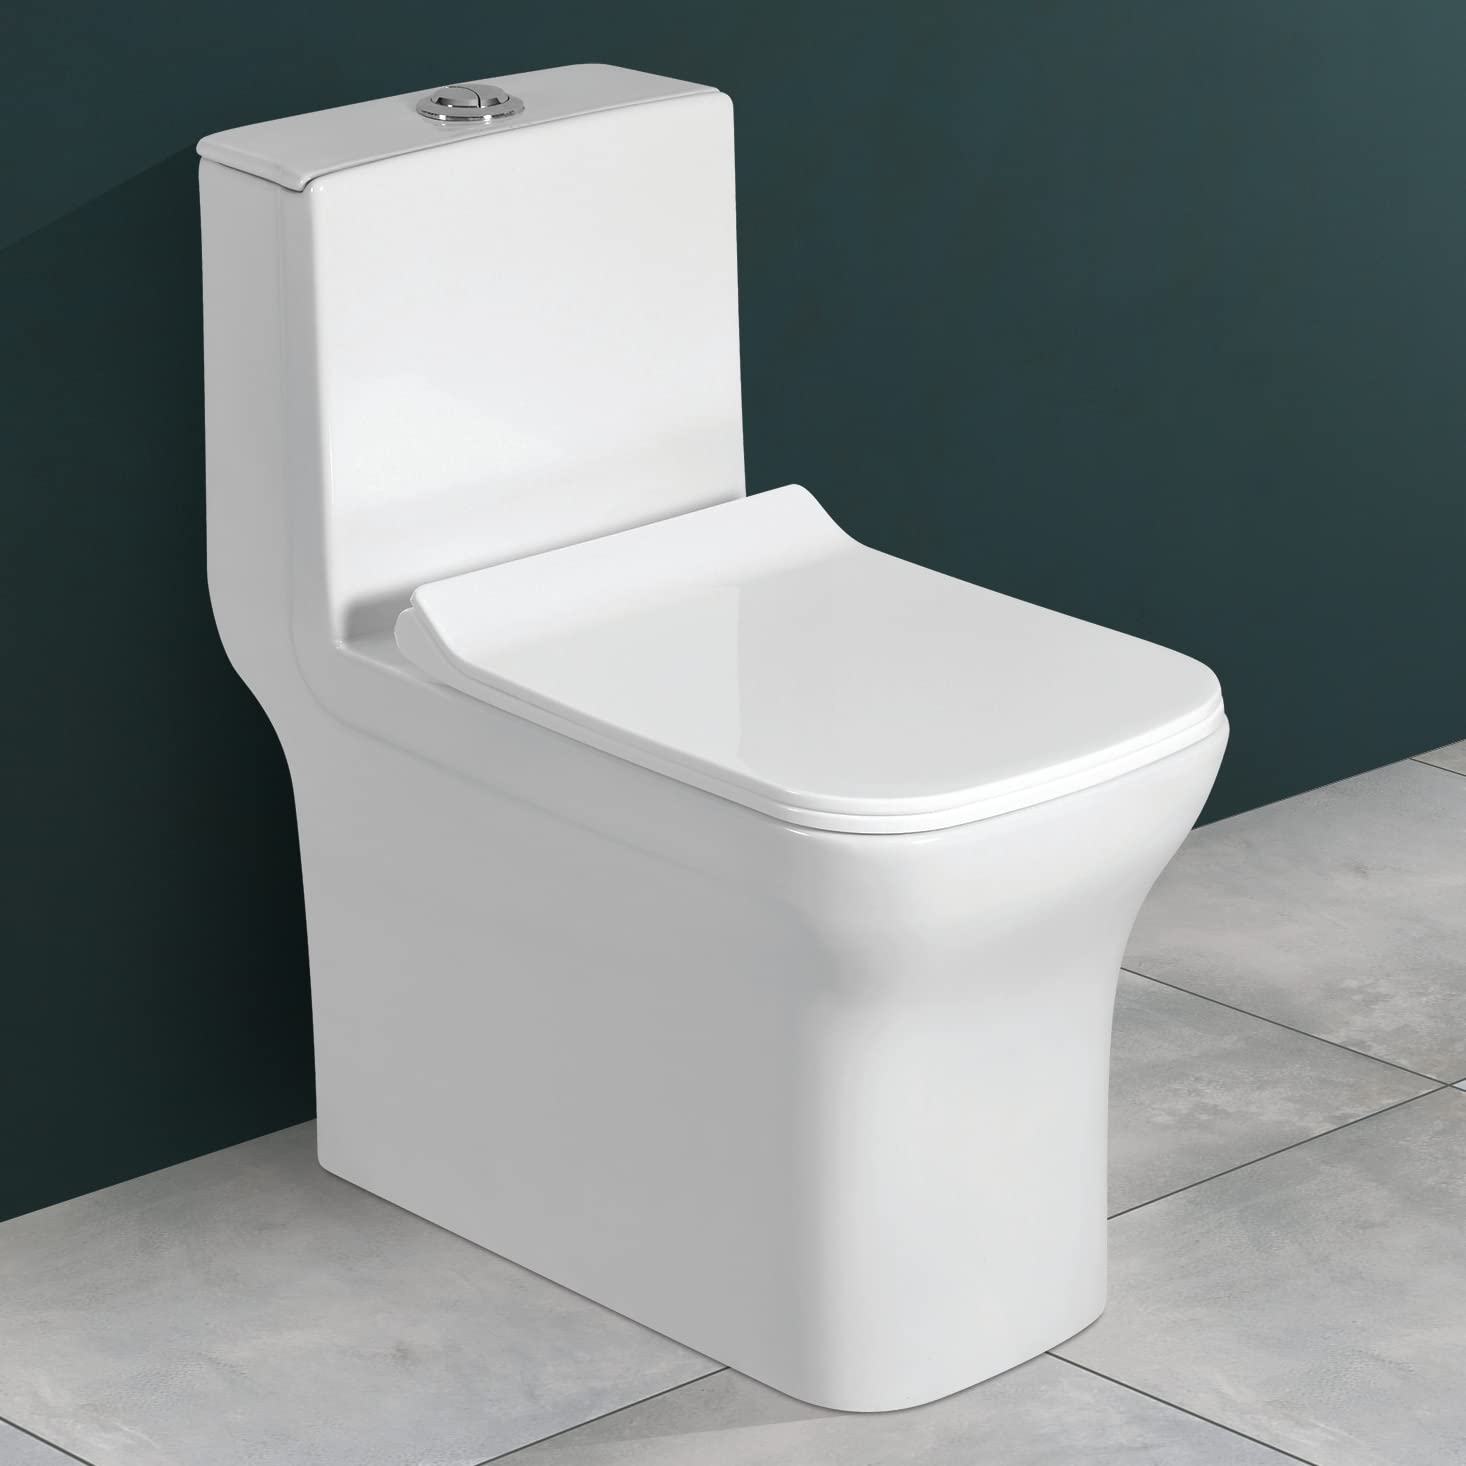 Plantex Platinium Ceramic One Piece Western Toilet/Water Closet/Commode With Soft Close Toilet Seat - S Trap Outlet (APS-743, White)